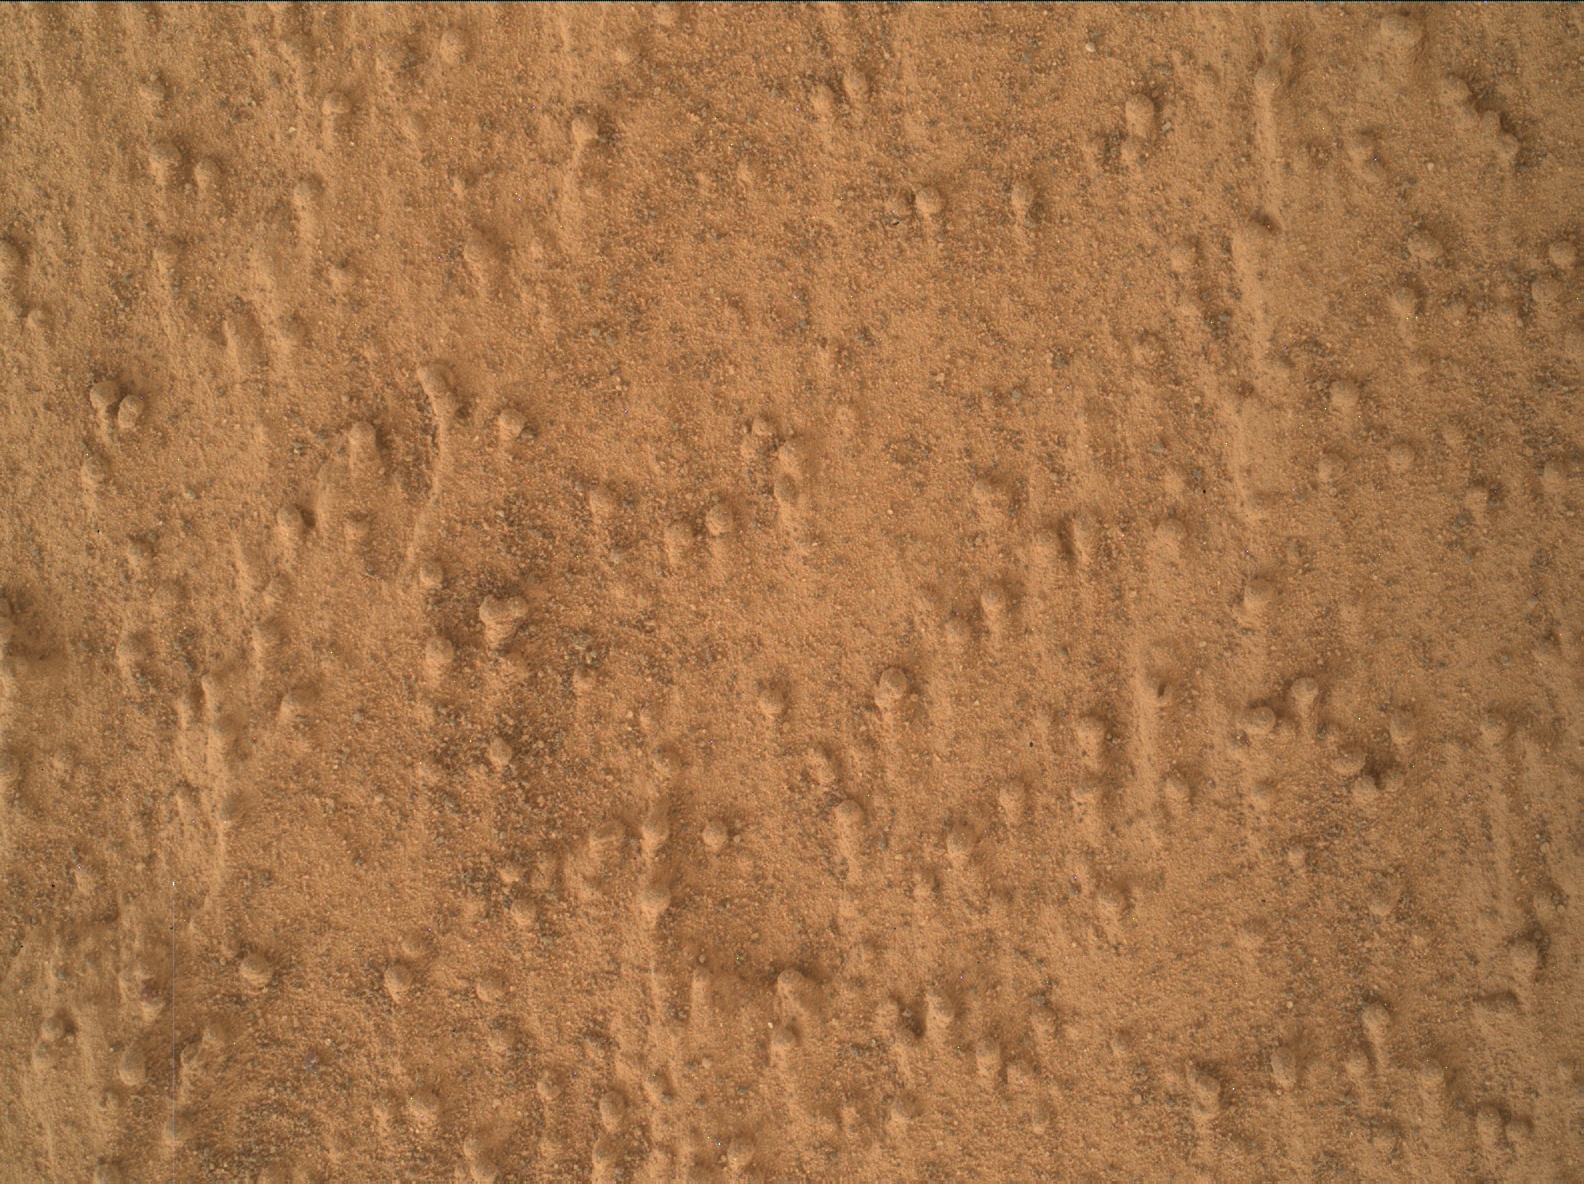 Nasa's Mars rover Curiosity acquired this image using its Mars Hand Lens Imager (MAHLI) on Sol 3364